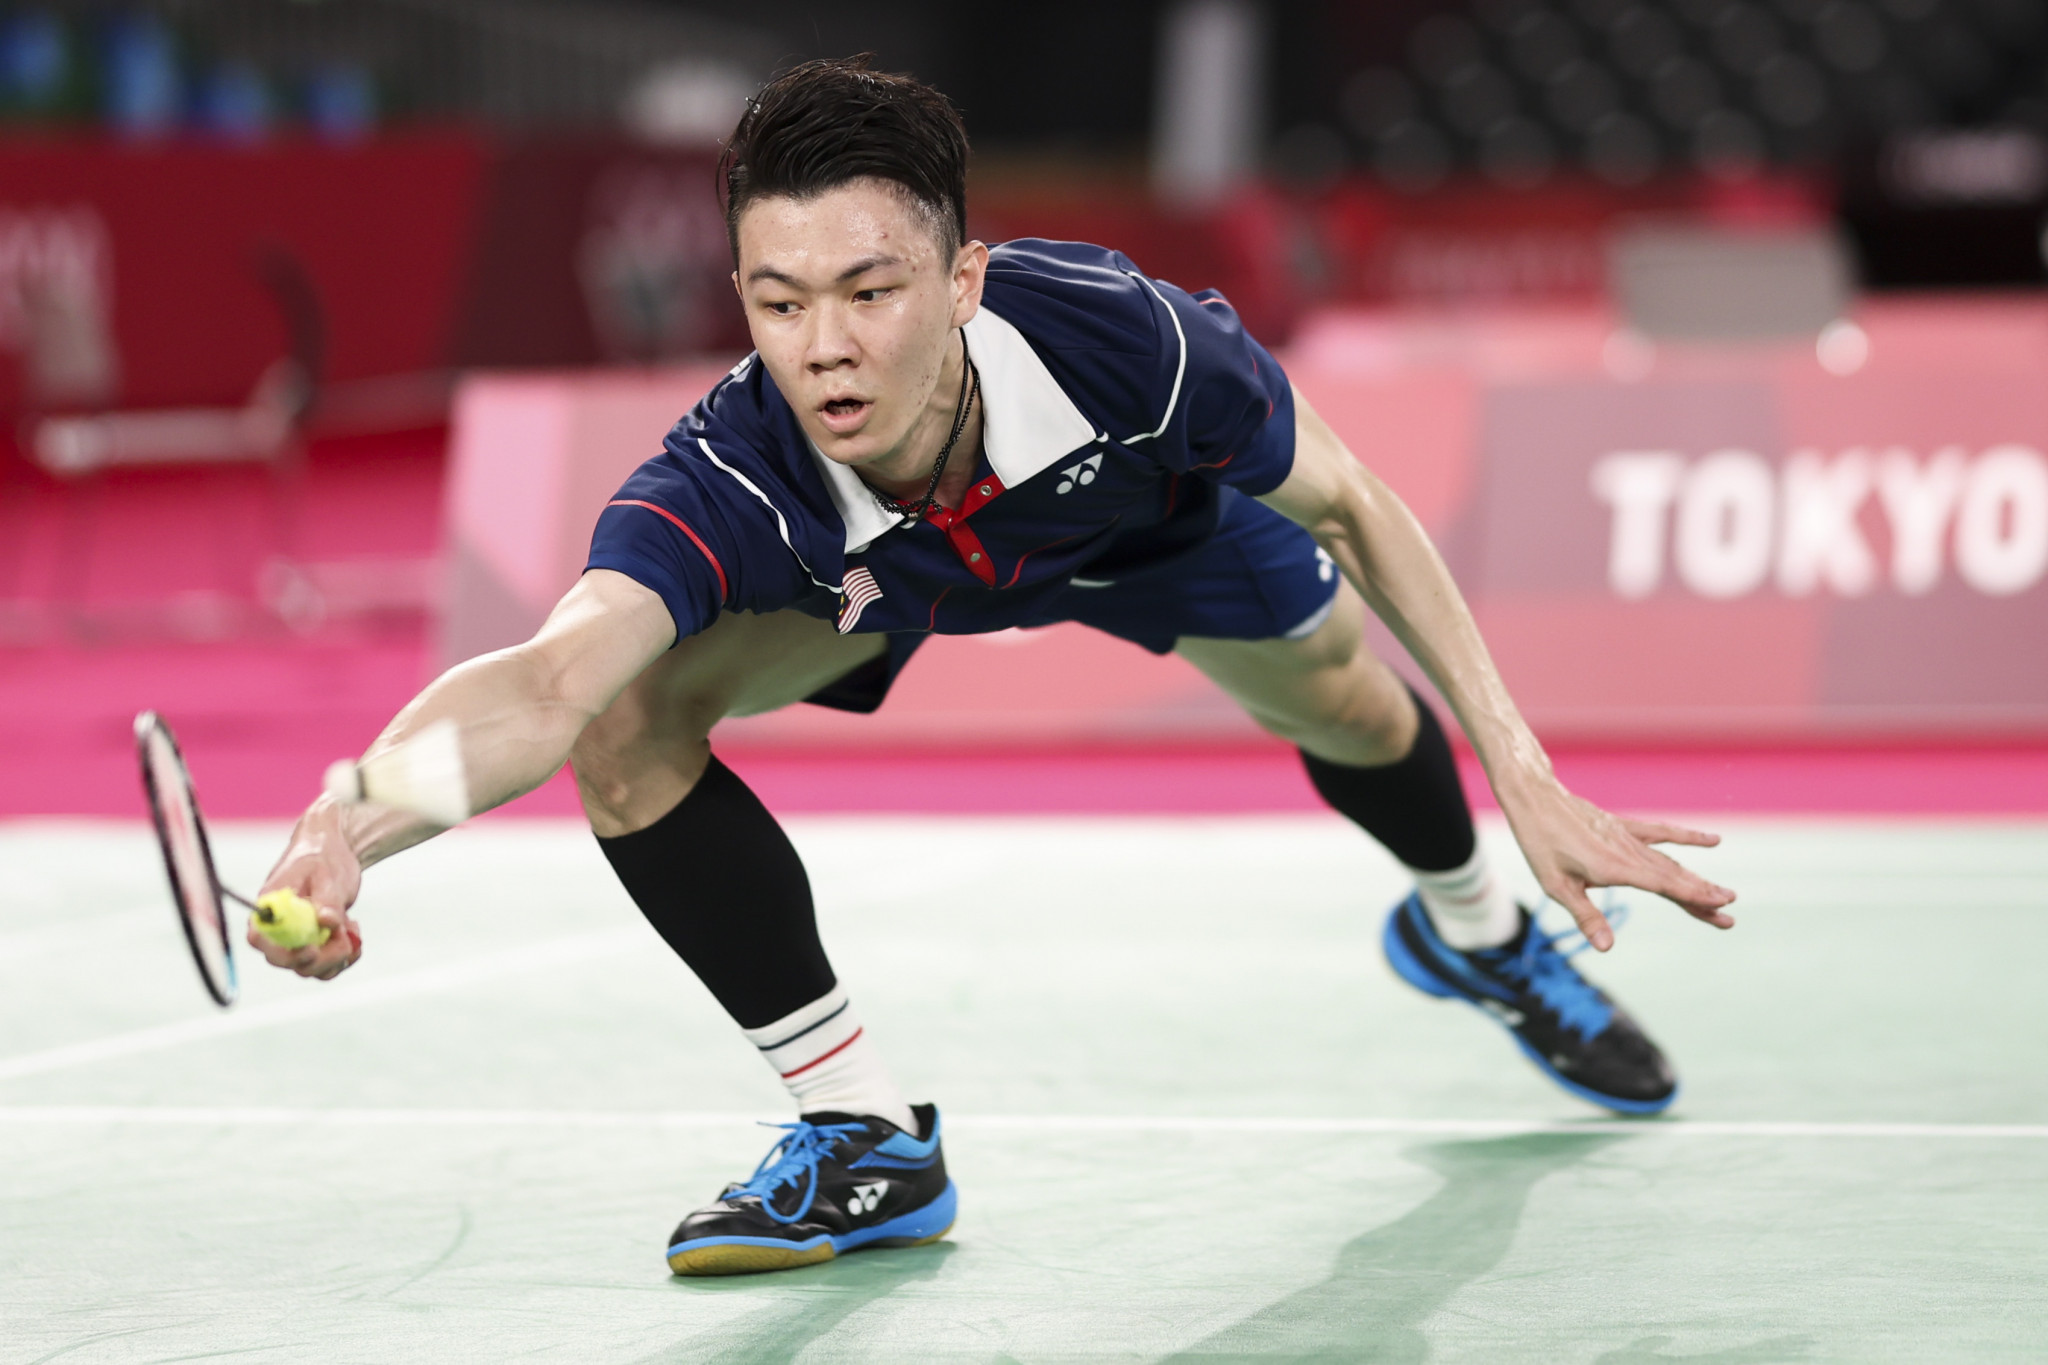 Malaysia's Lee Zii Jia beat world champion Loh Kean Yew at the Badminton Asia Team Championships today ©Getty Images